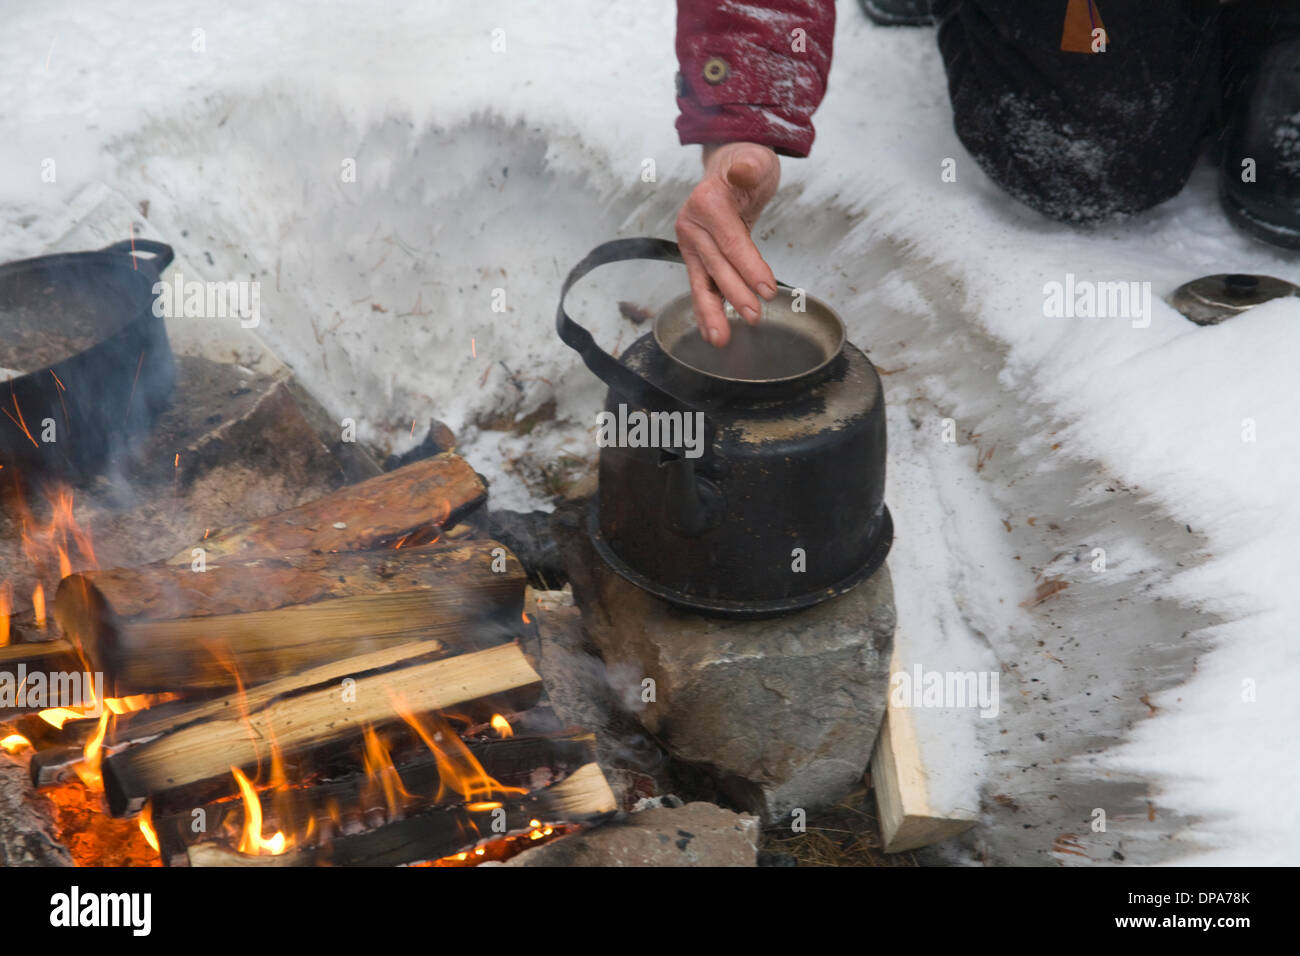 Outdoorlife Cooking on Campfire Coffee-cettle and Jokkmokk Historic Fair Laponia Sweden Stock Photo